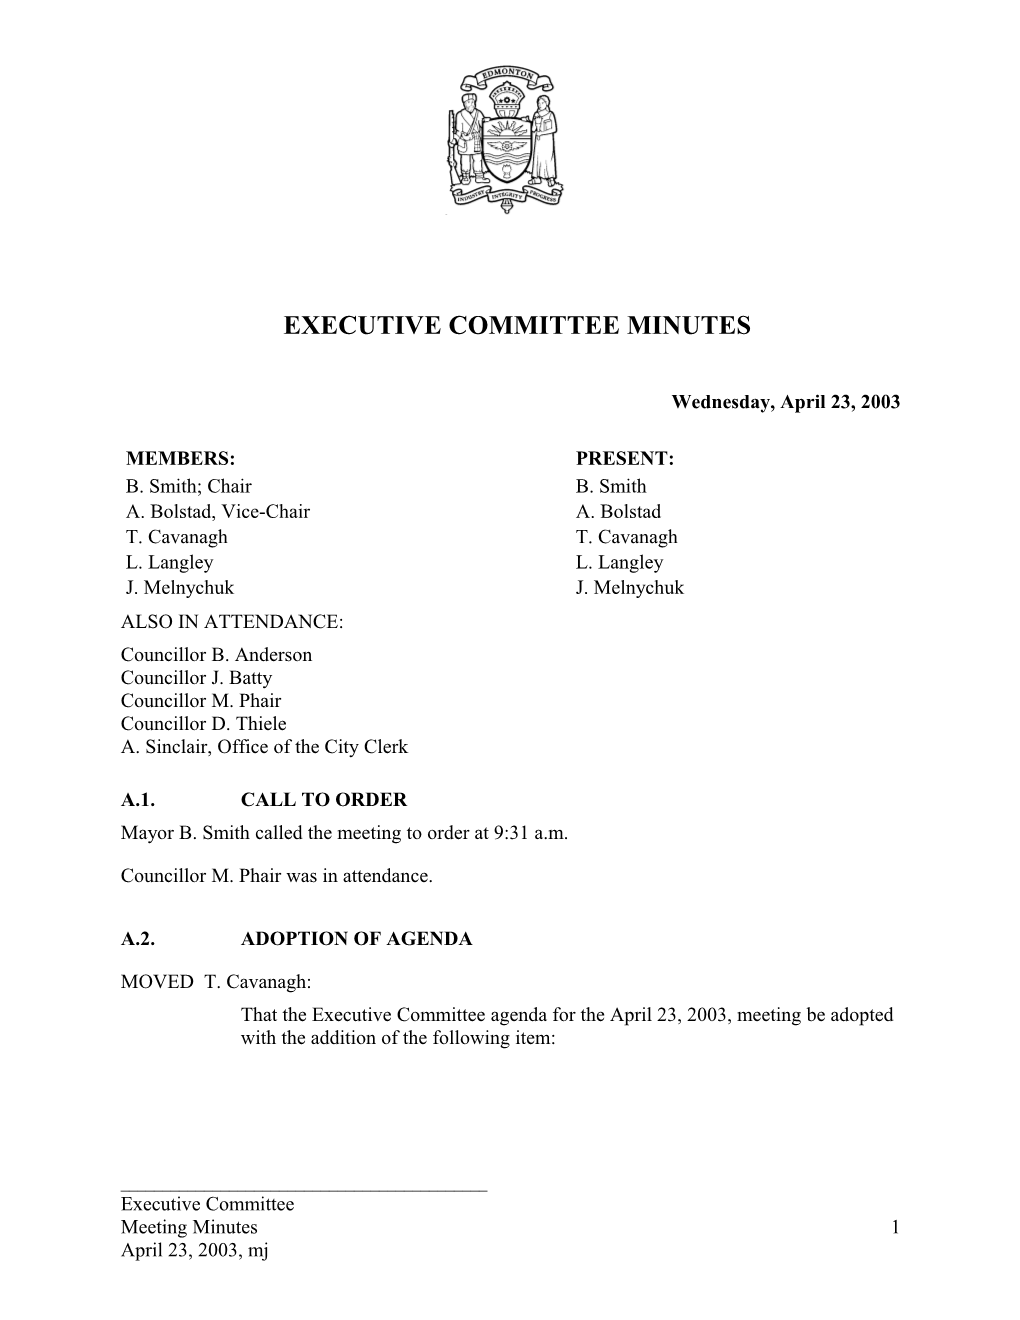 Minutes for Executive Committee April 23, 2003 Meeting